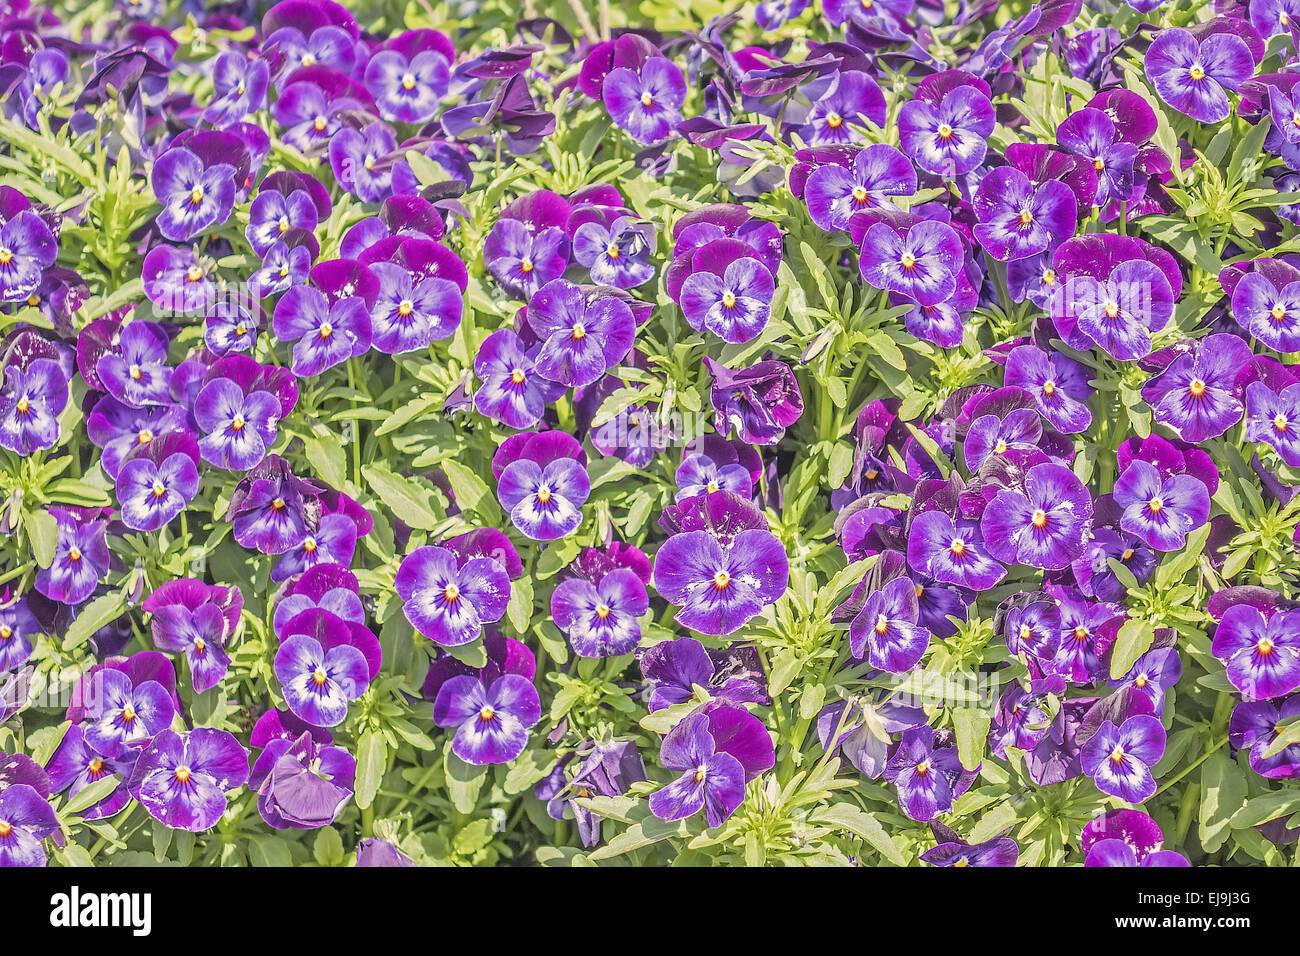 Pansy Flower (Violaceae) Patterns In Nature Stock Photo